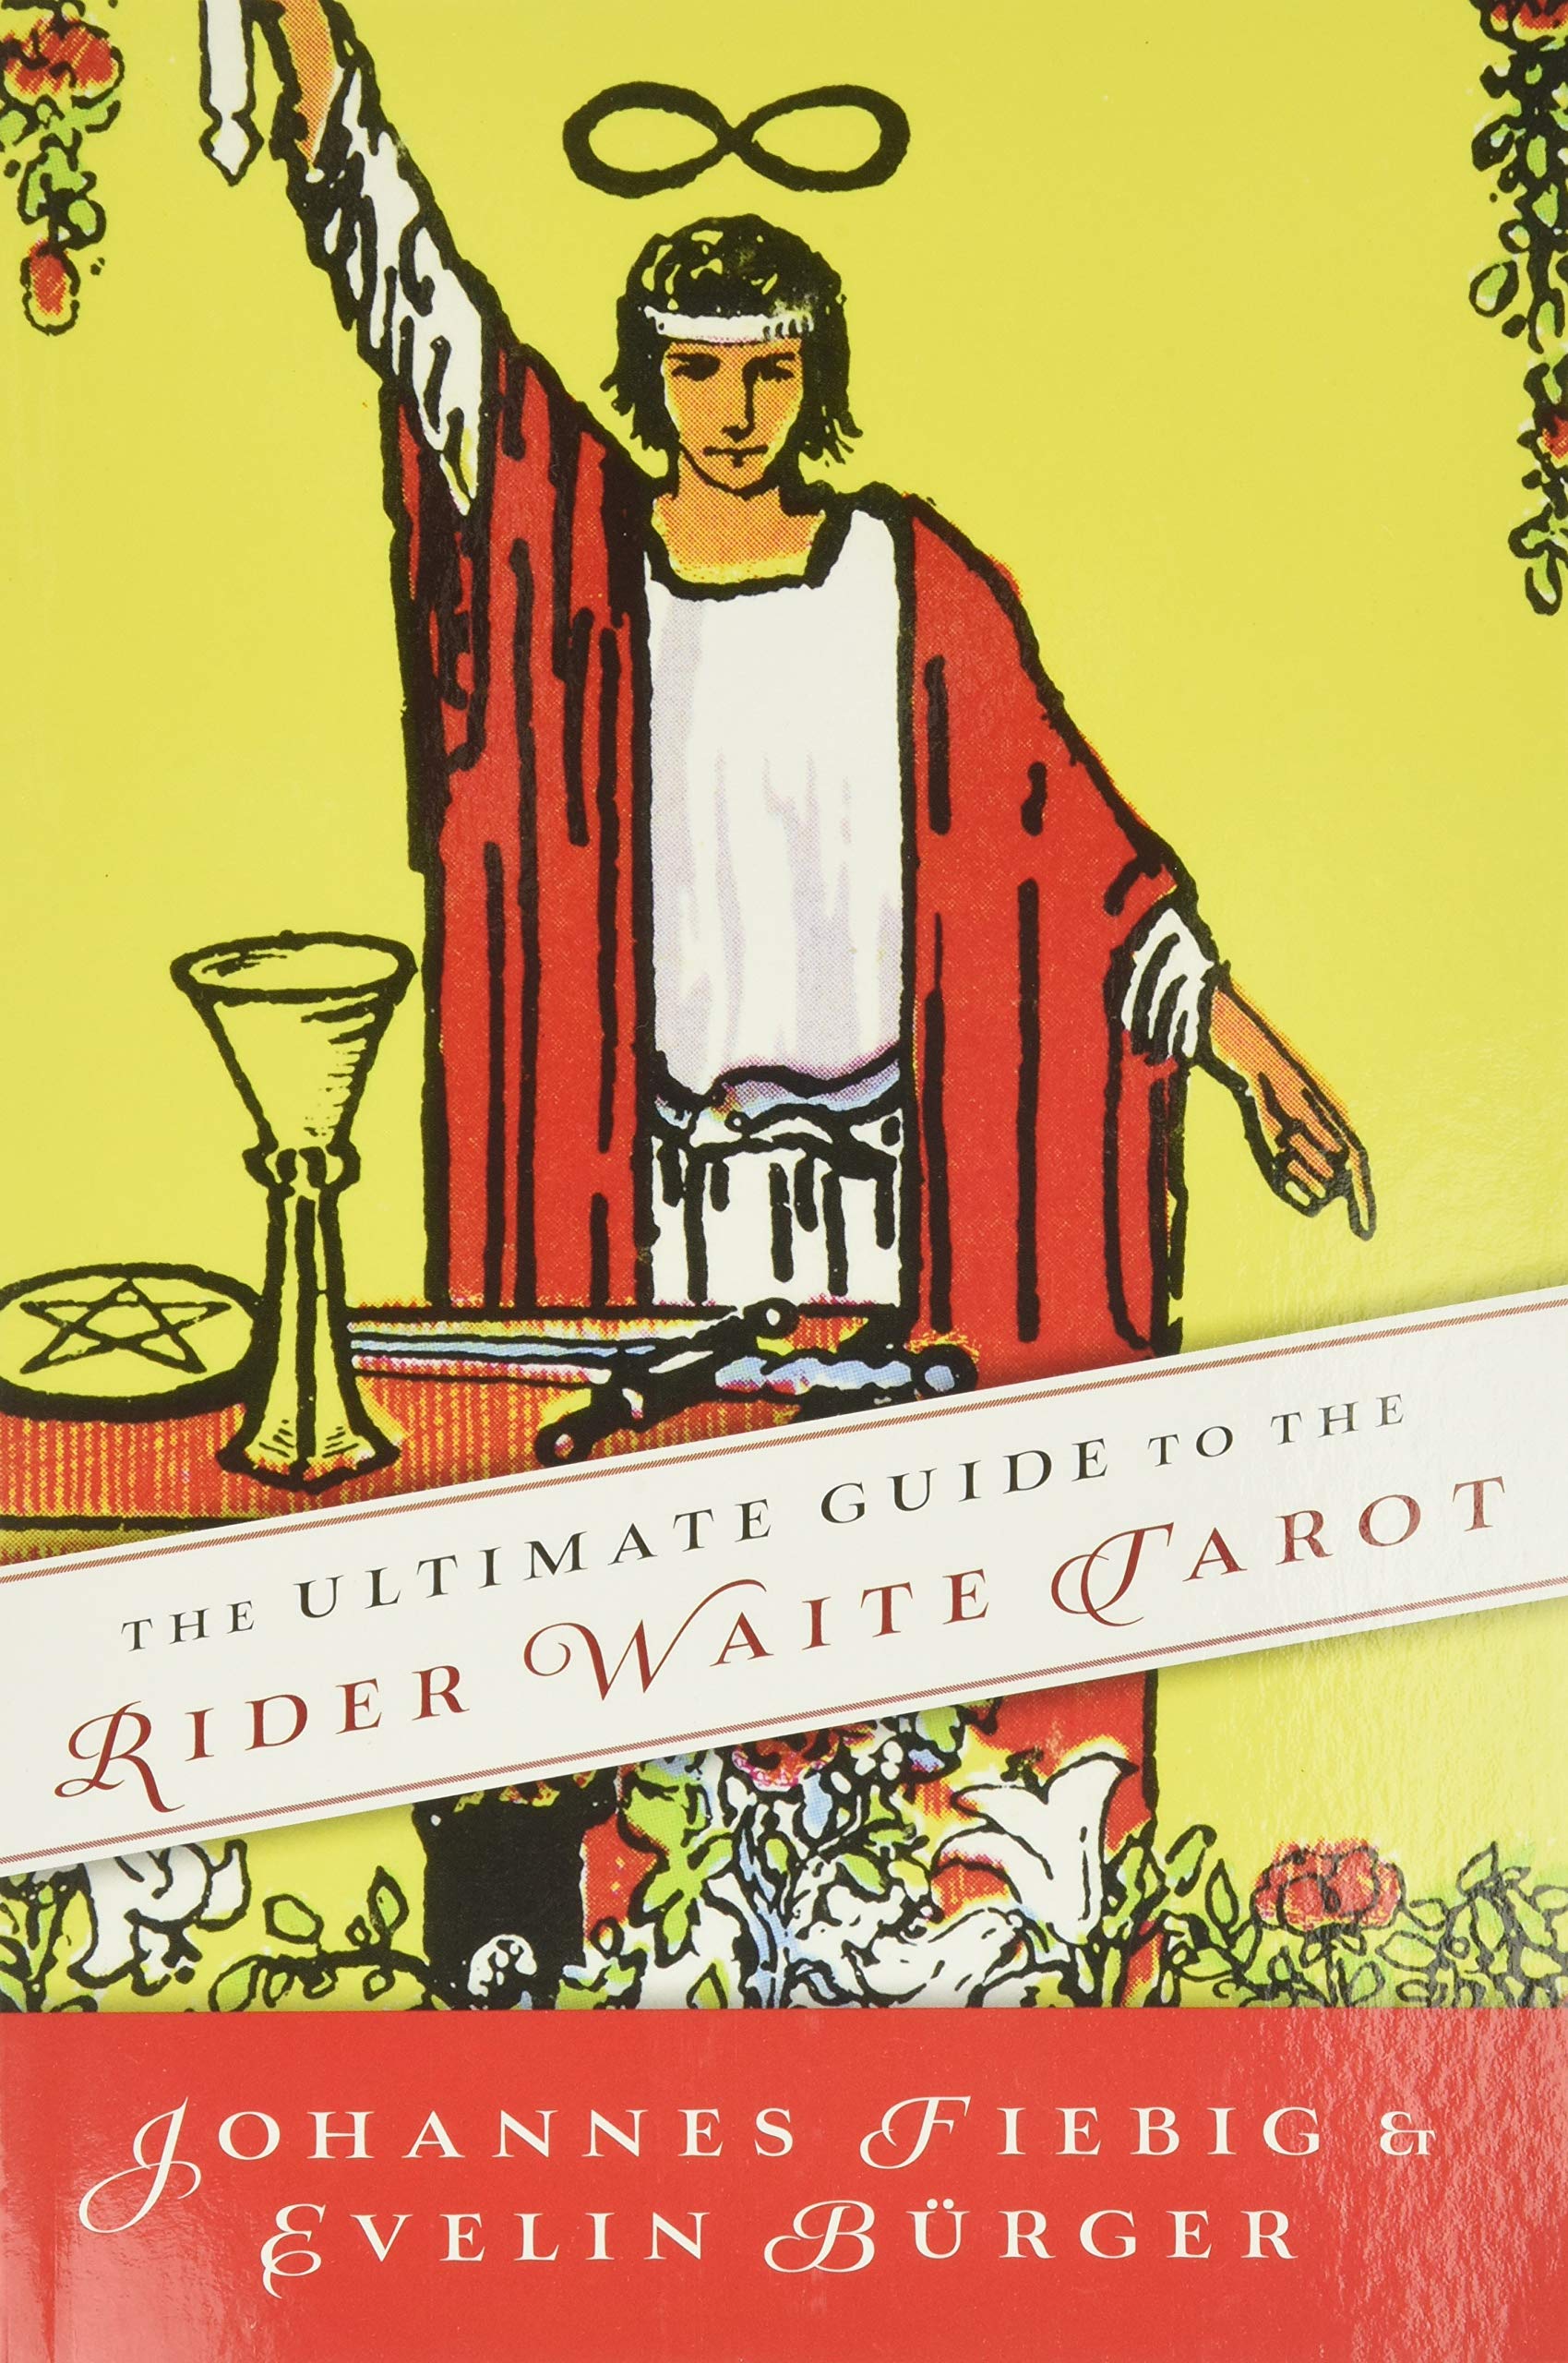 Tarot Books for Beginners, According to Pros |